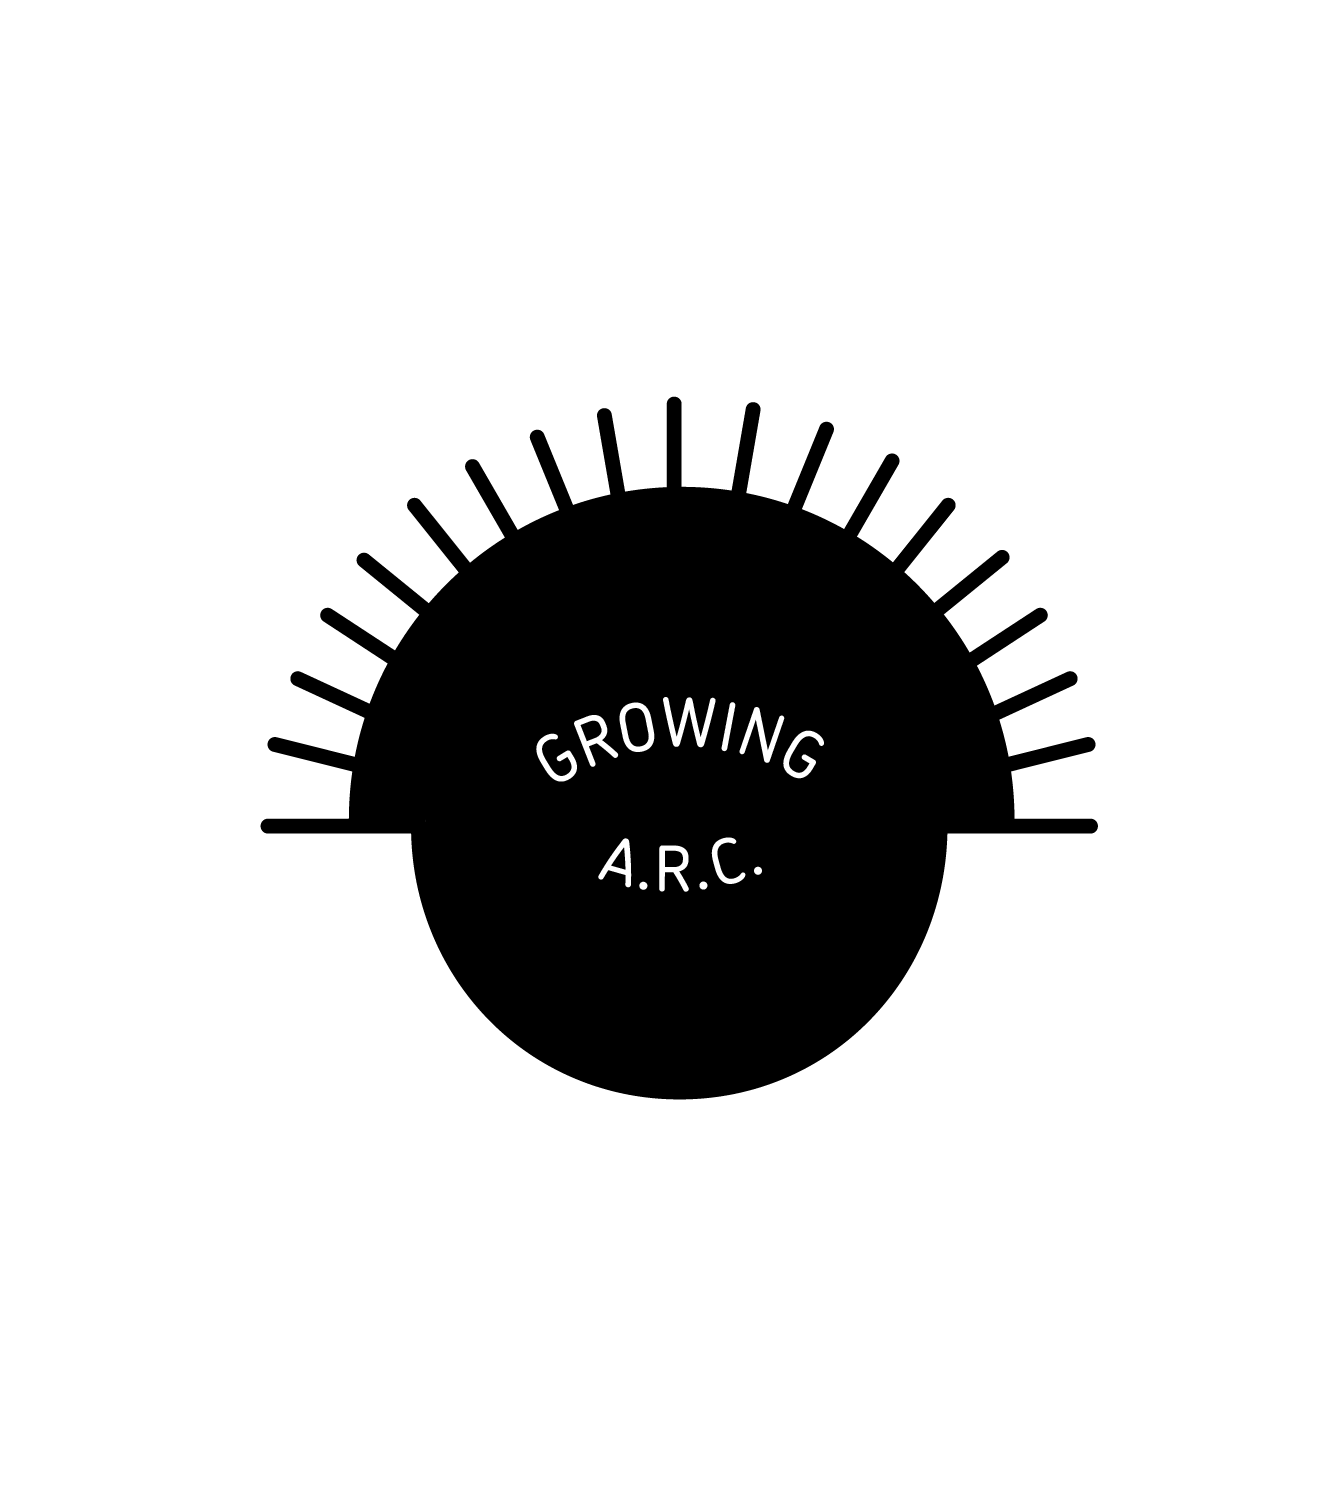 Growing A.R.C.